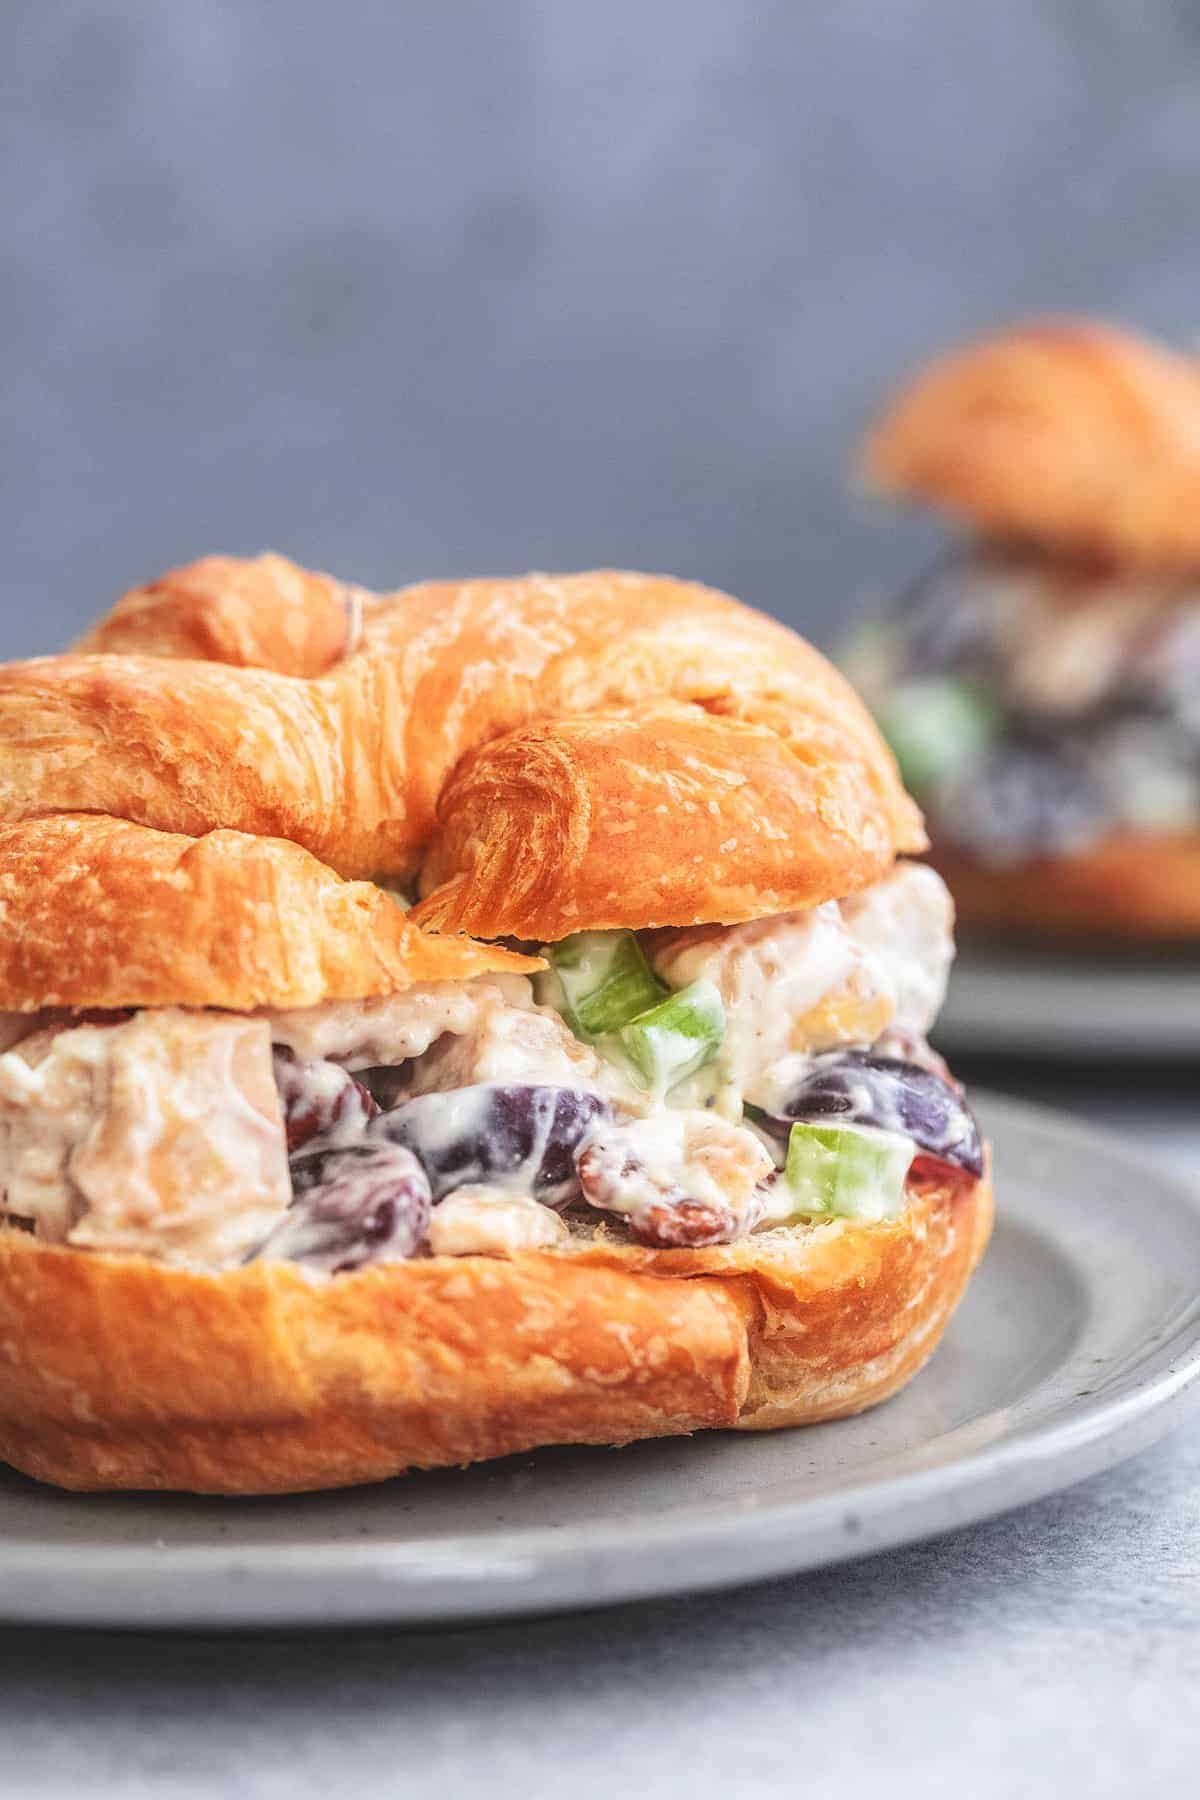 up close chicken salad sandwich croissant on a plate.